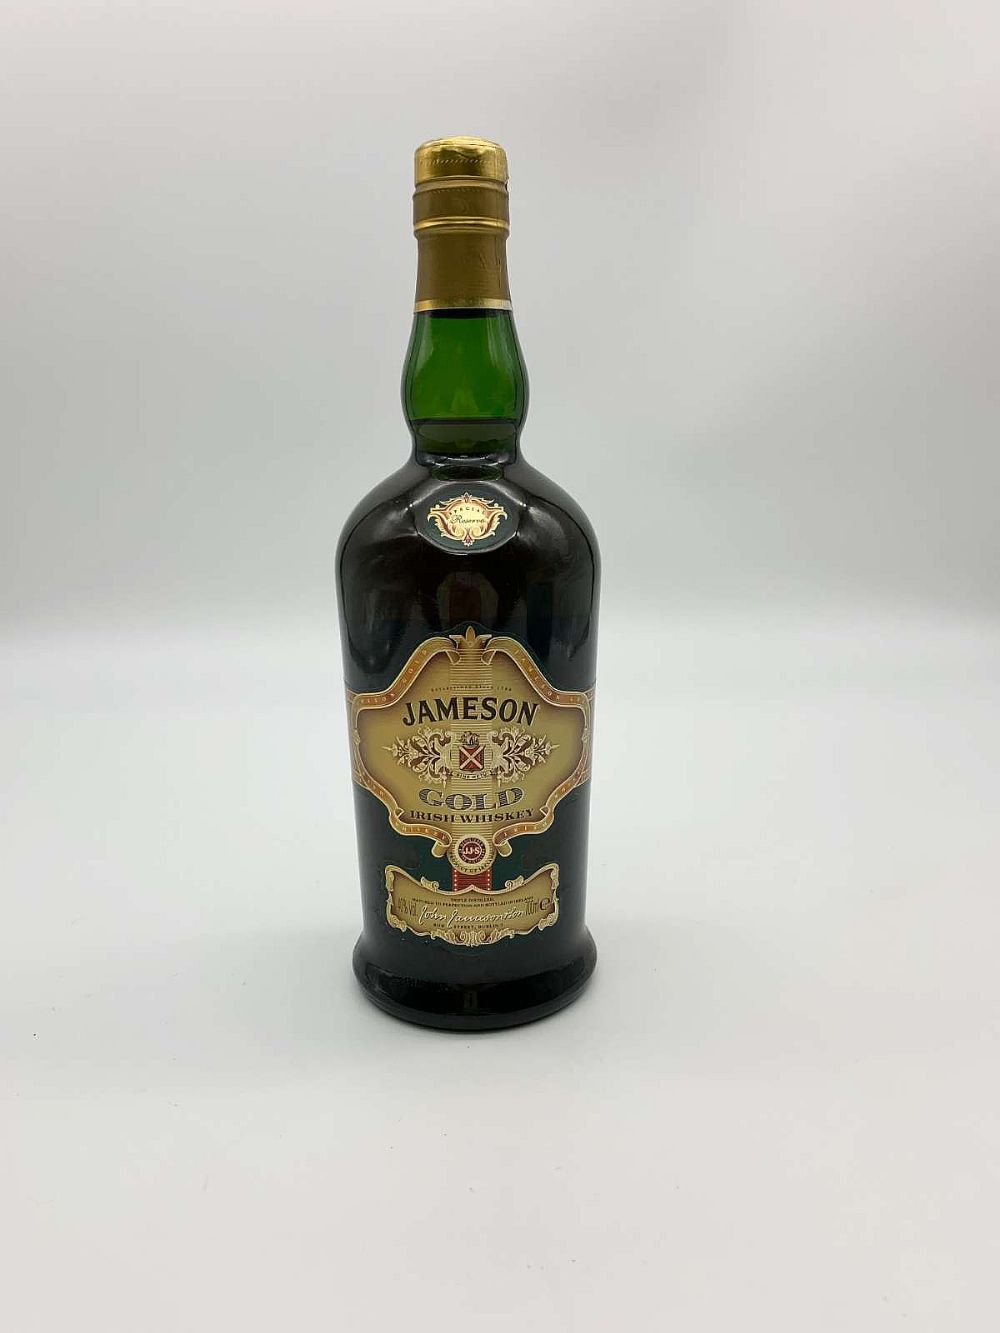 Jameson Gold Special Reserve